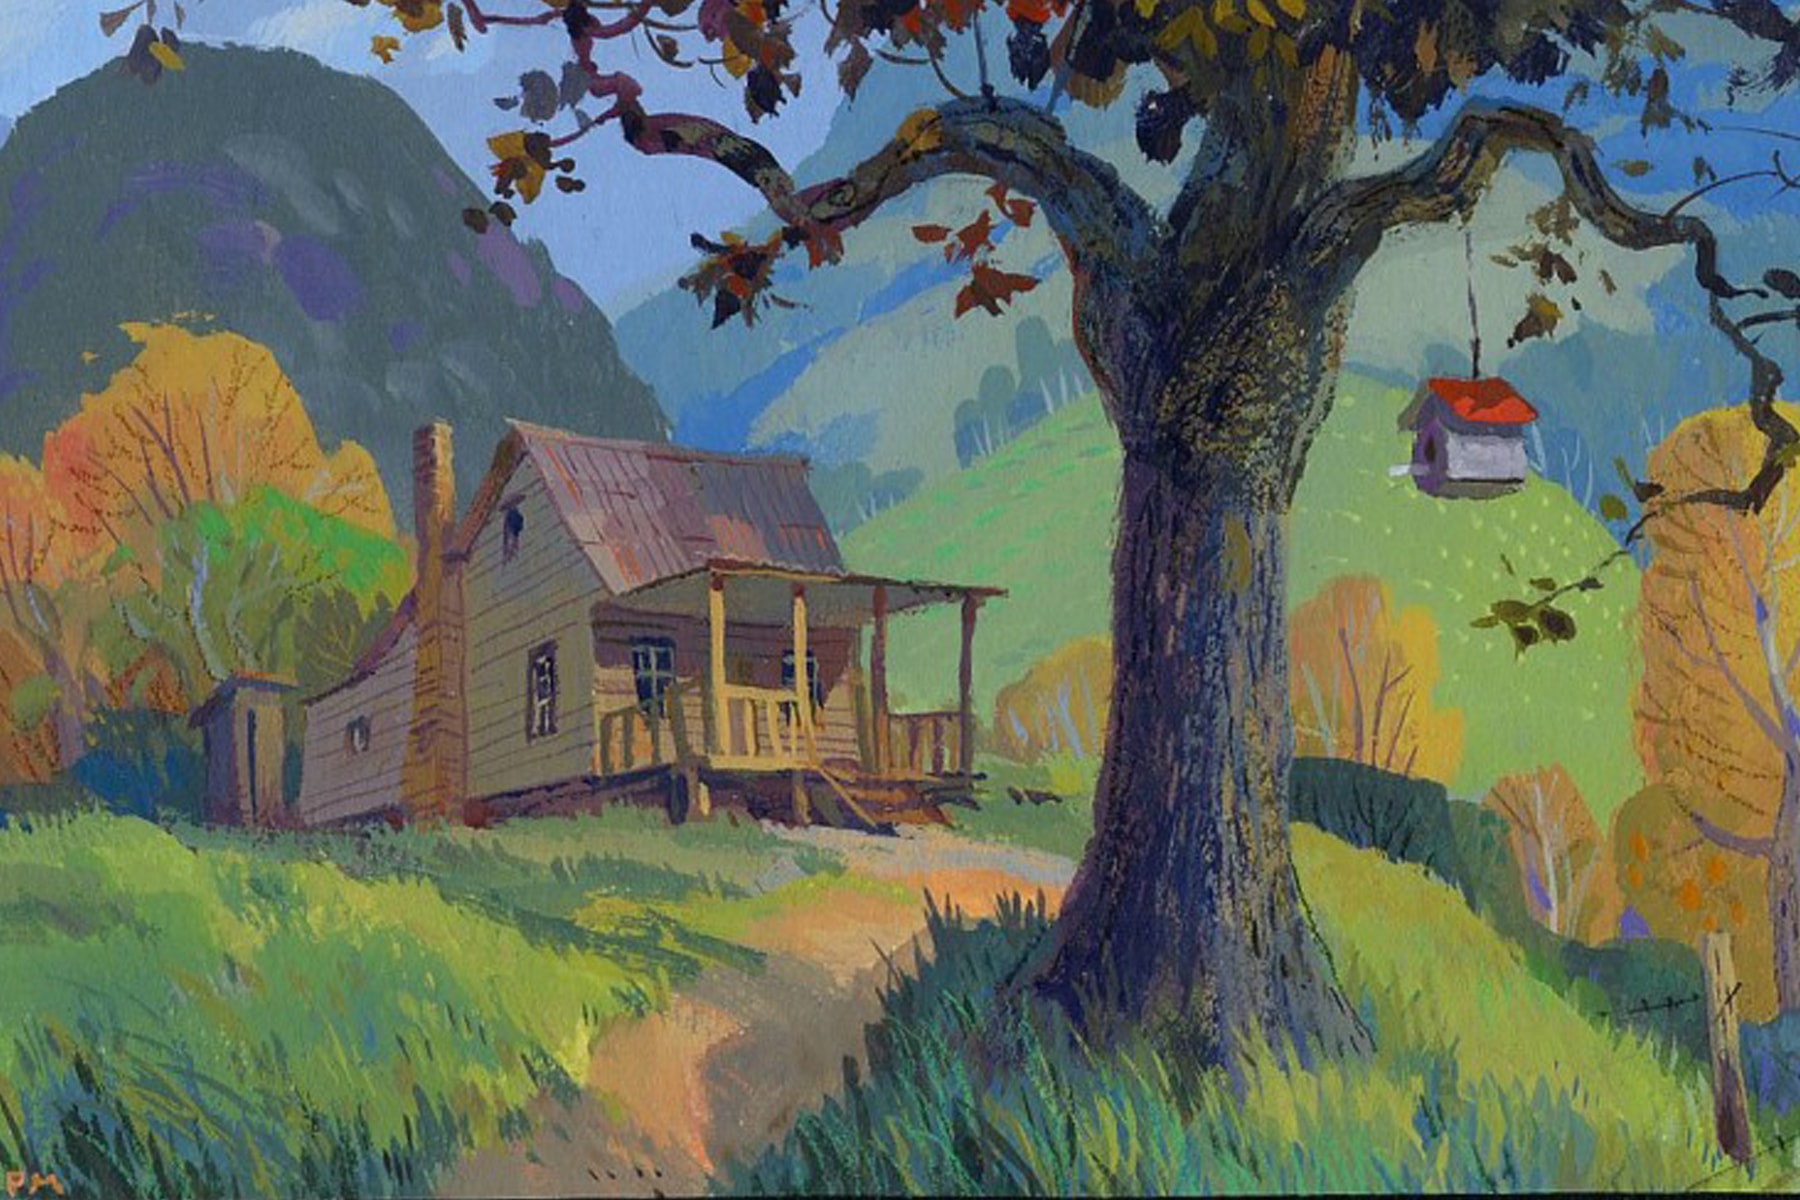 Peter Moehrle's painting of a cabin on a hill for the cancelled Disney project My Peoples